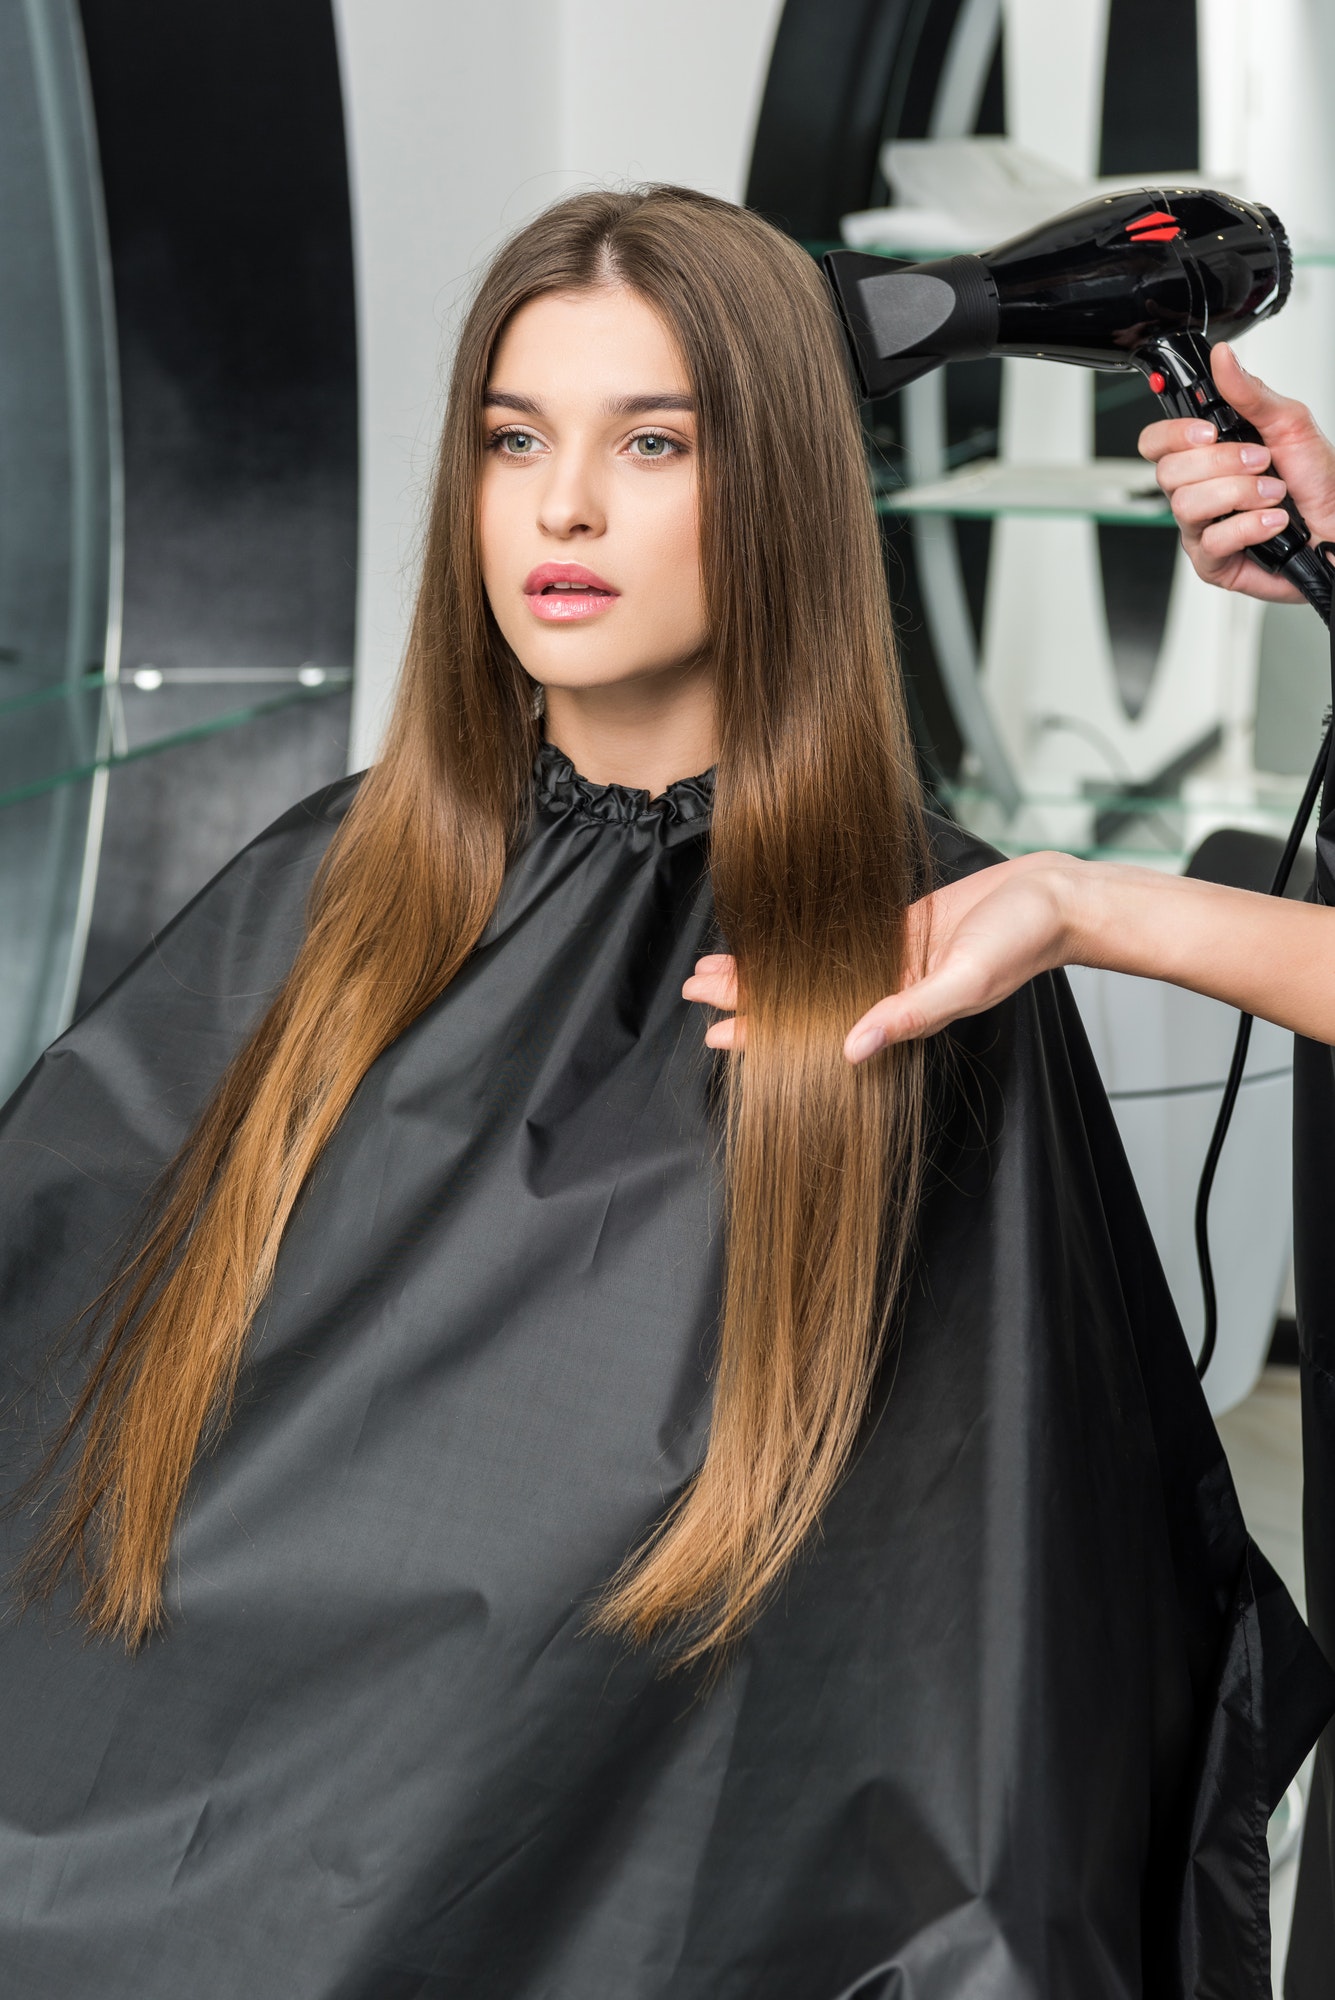 hairdresser drying long hair of young woman in beauty salon